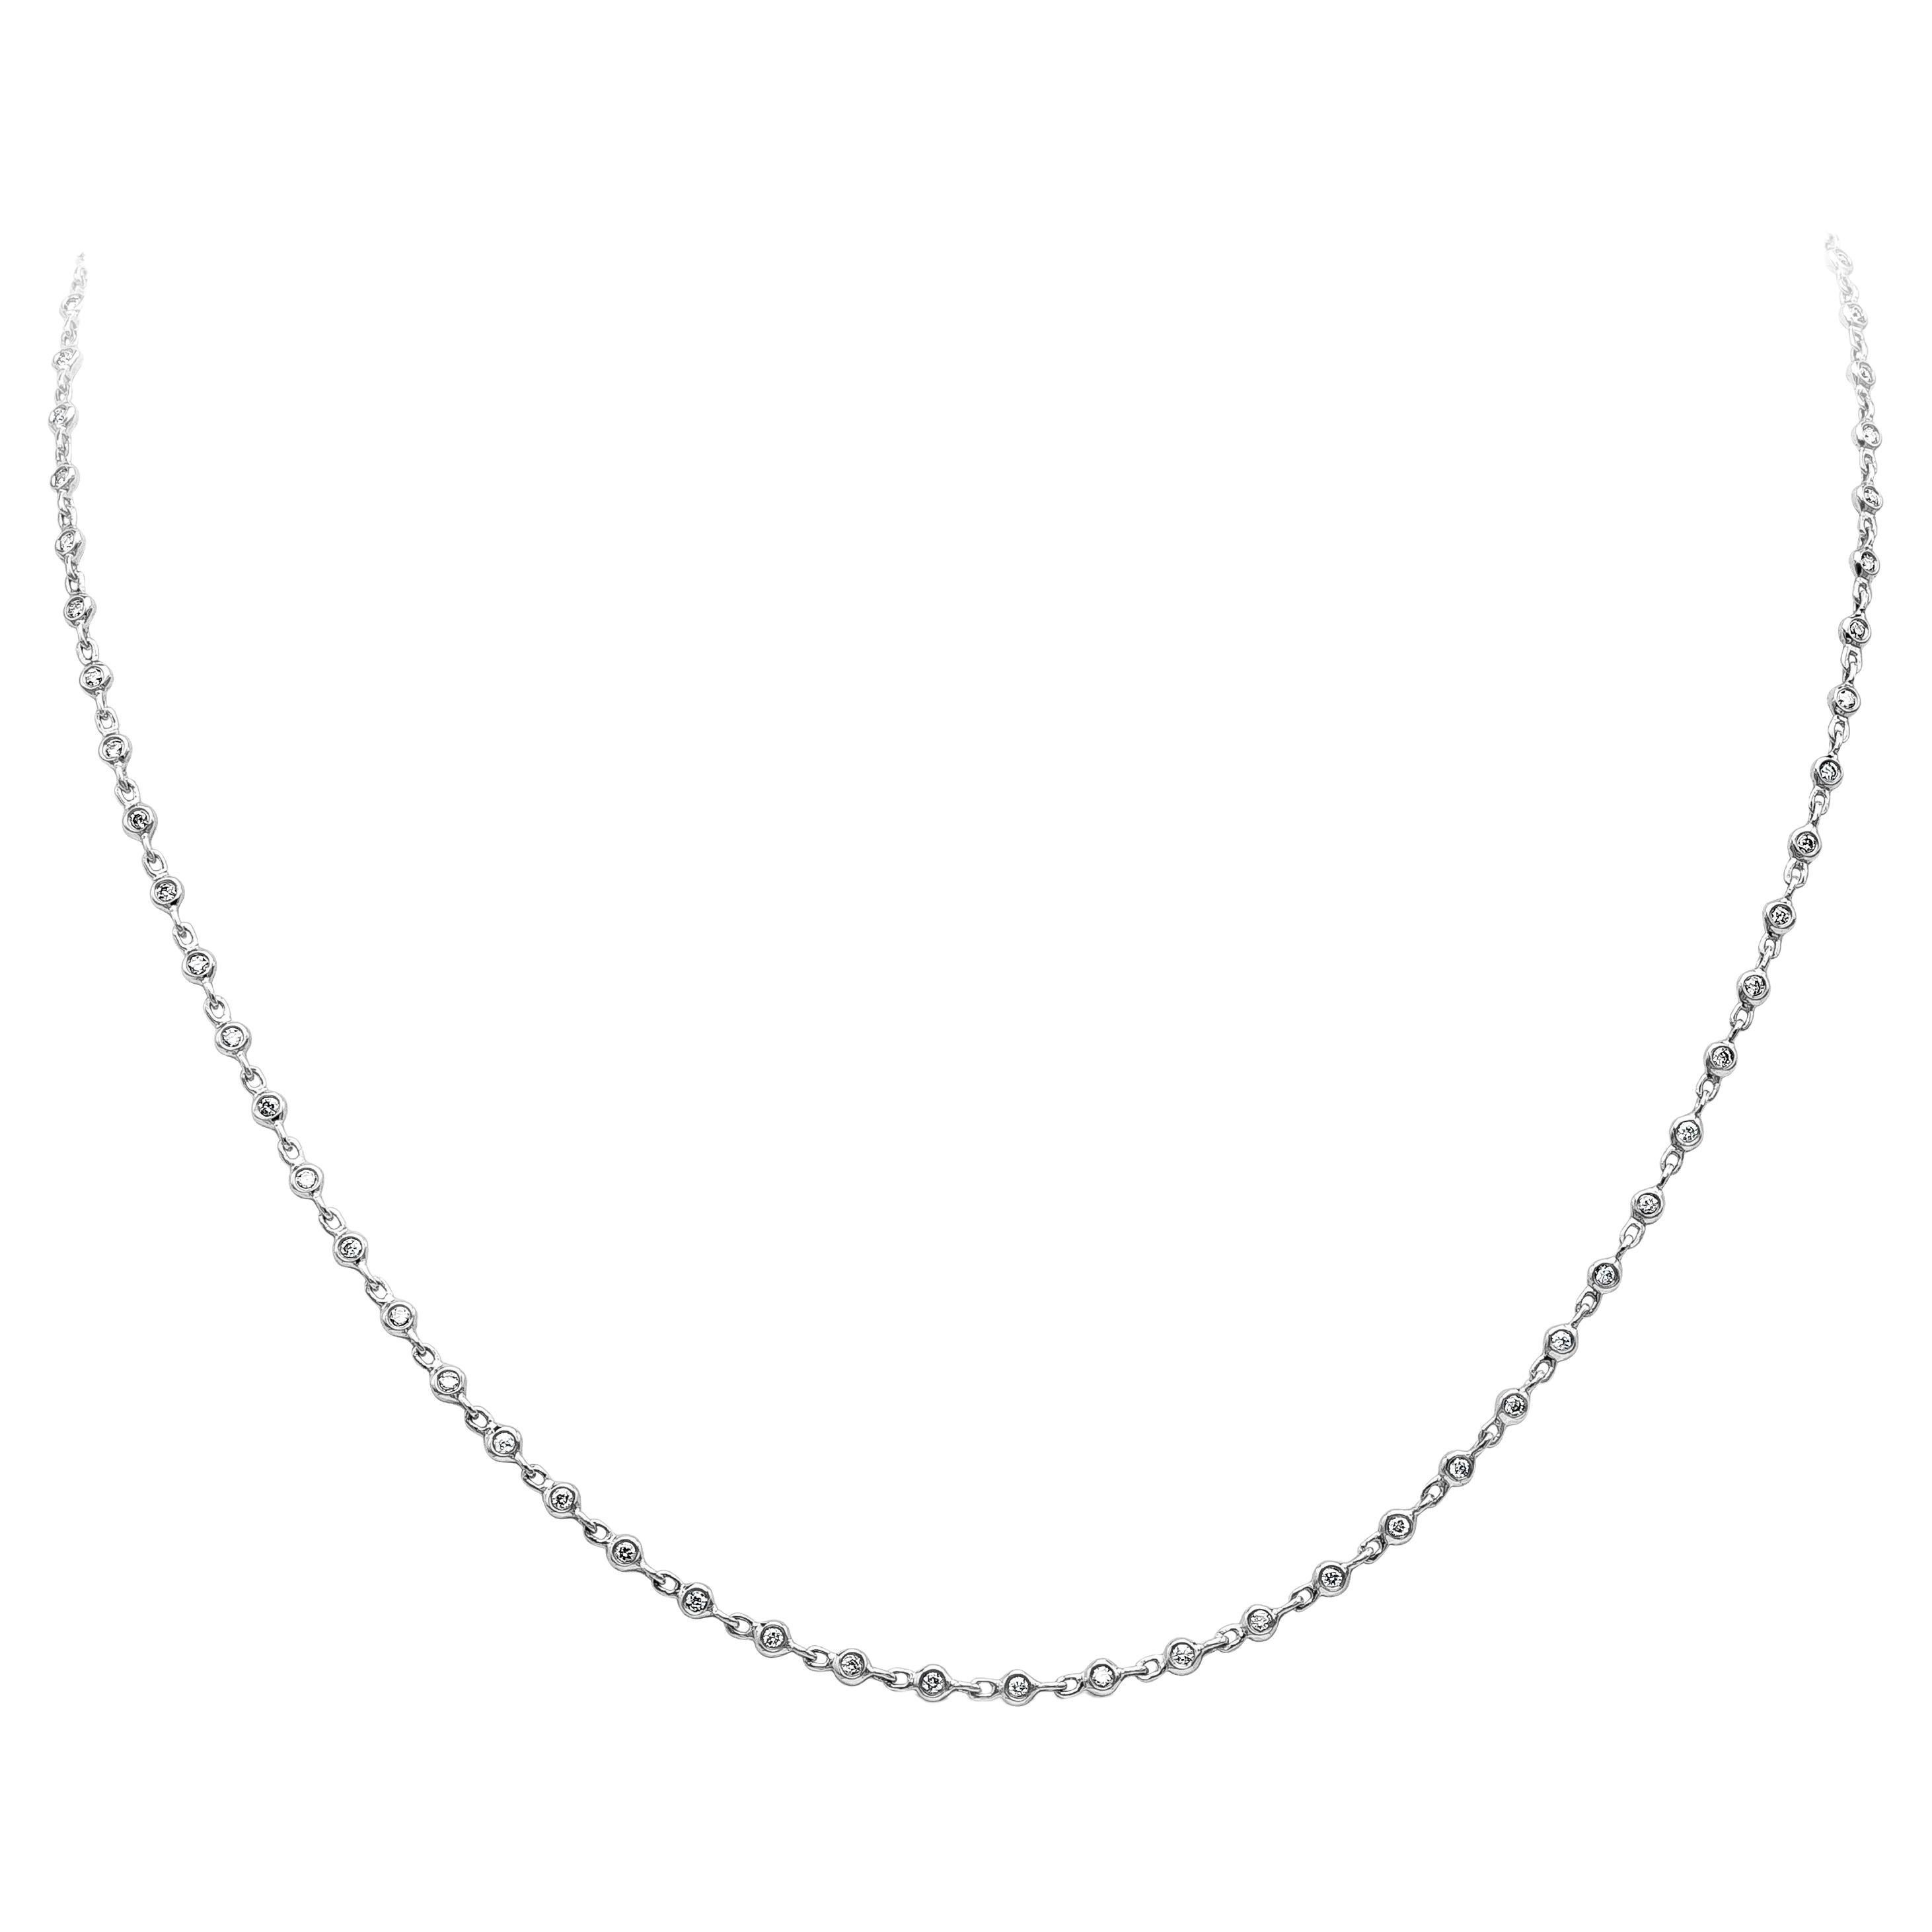 Roman Malakov 0.62 Carats Total Round Shape Diamond By The Yard Necklace For Sale